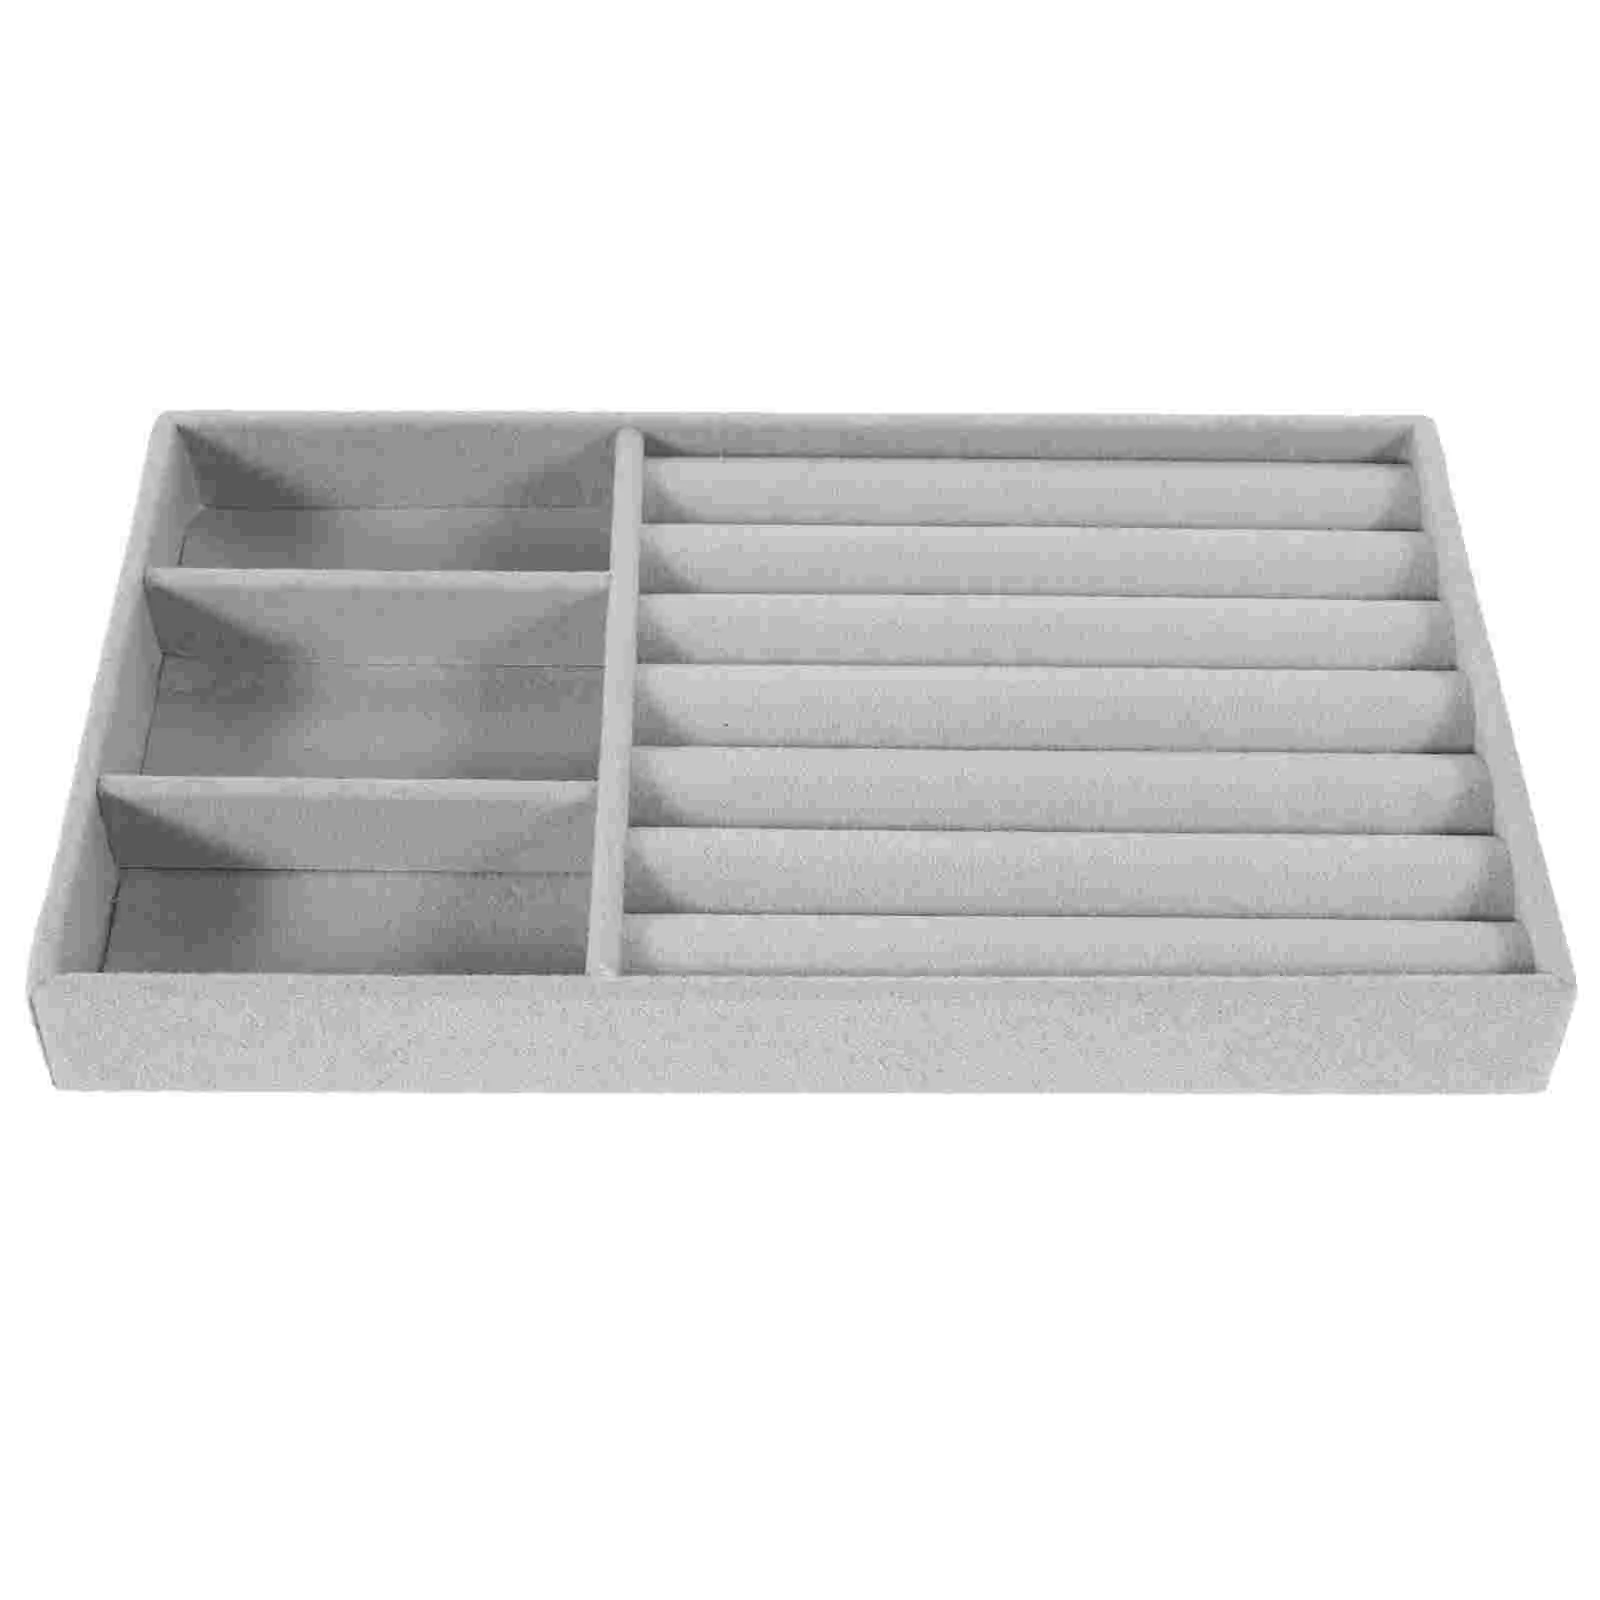 

Drawer Stackable Wood Tray Tray Holder Organizer for Drawers Display Selling Trays Rings Dresser Box